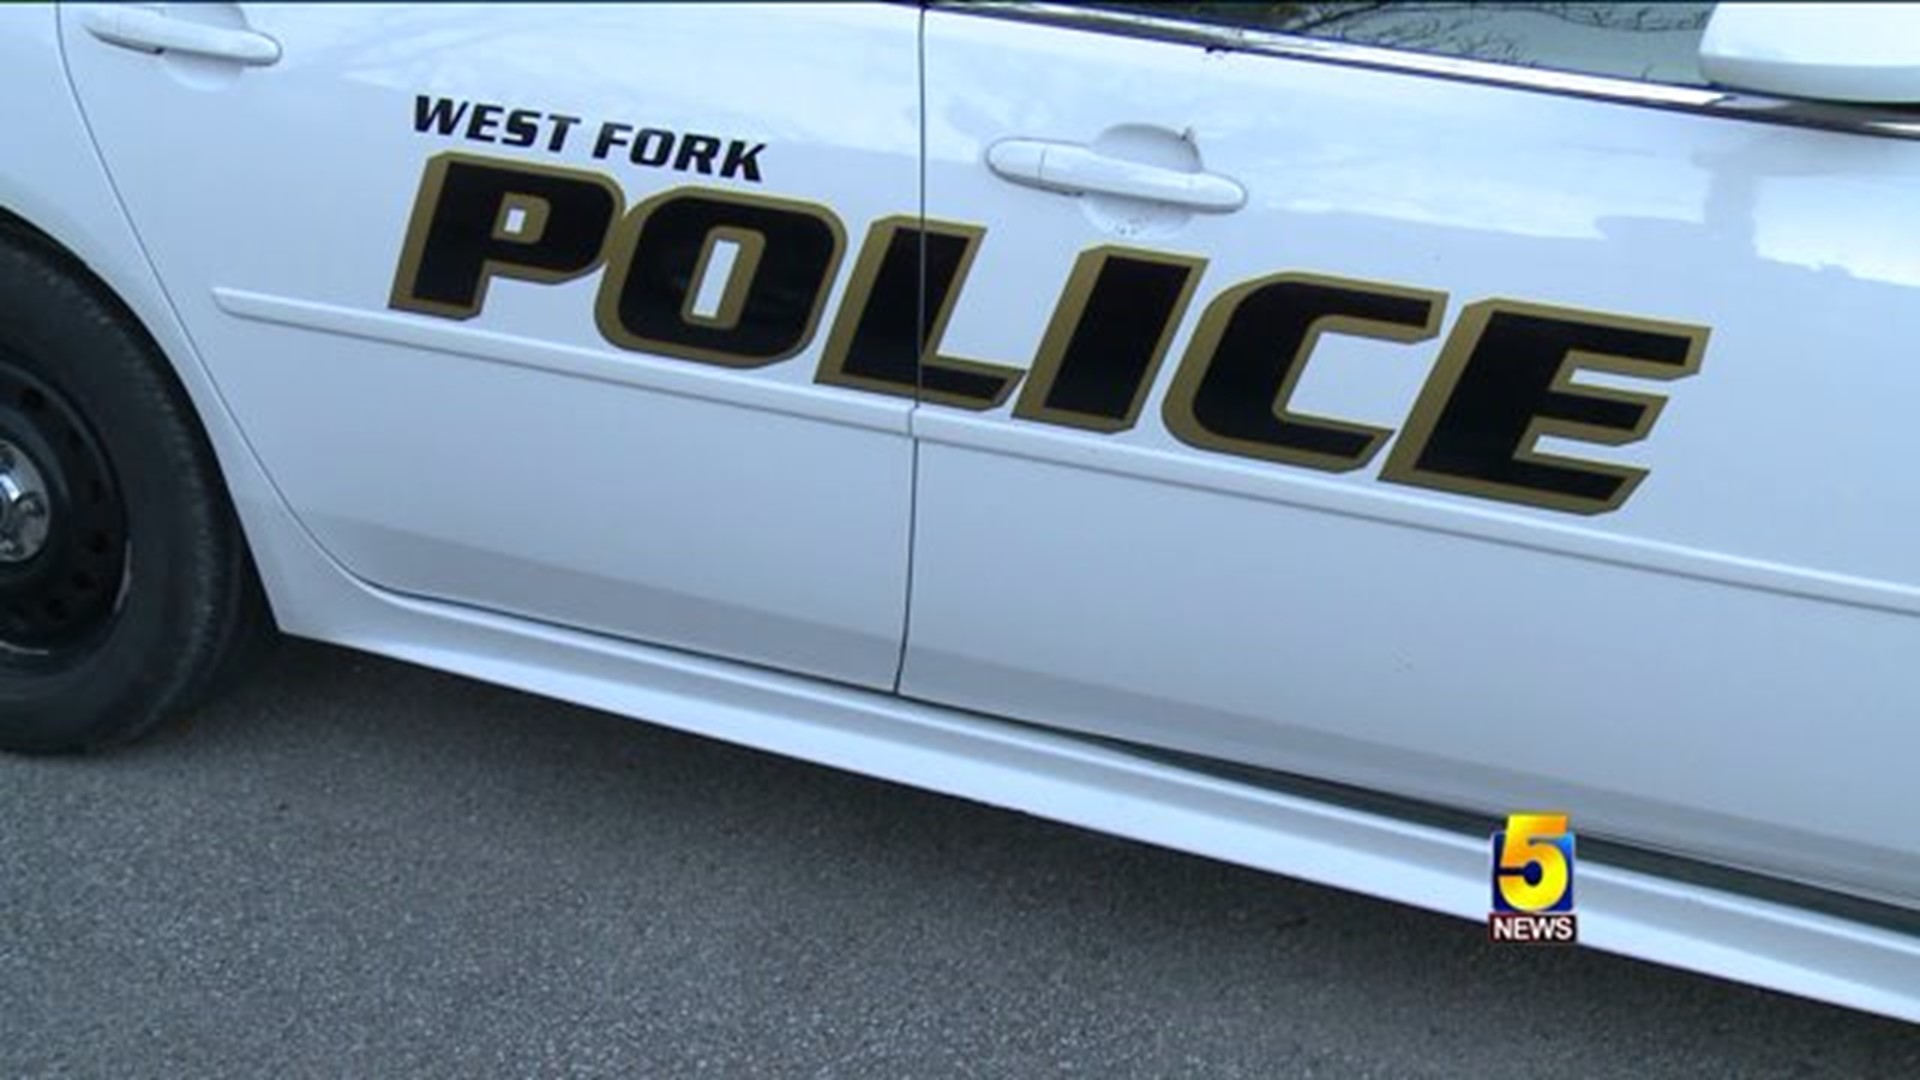 West Fork Police Chief Position Still Open